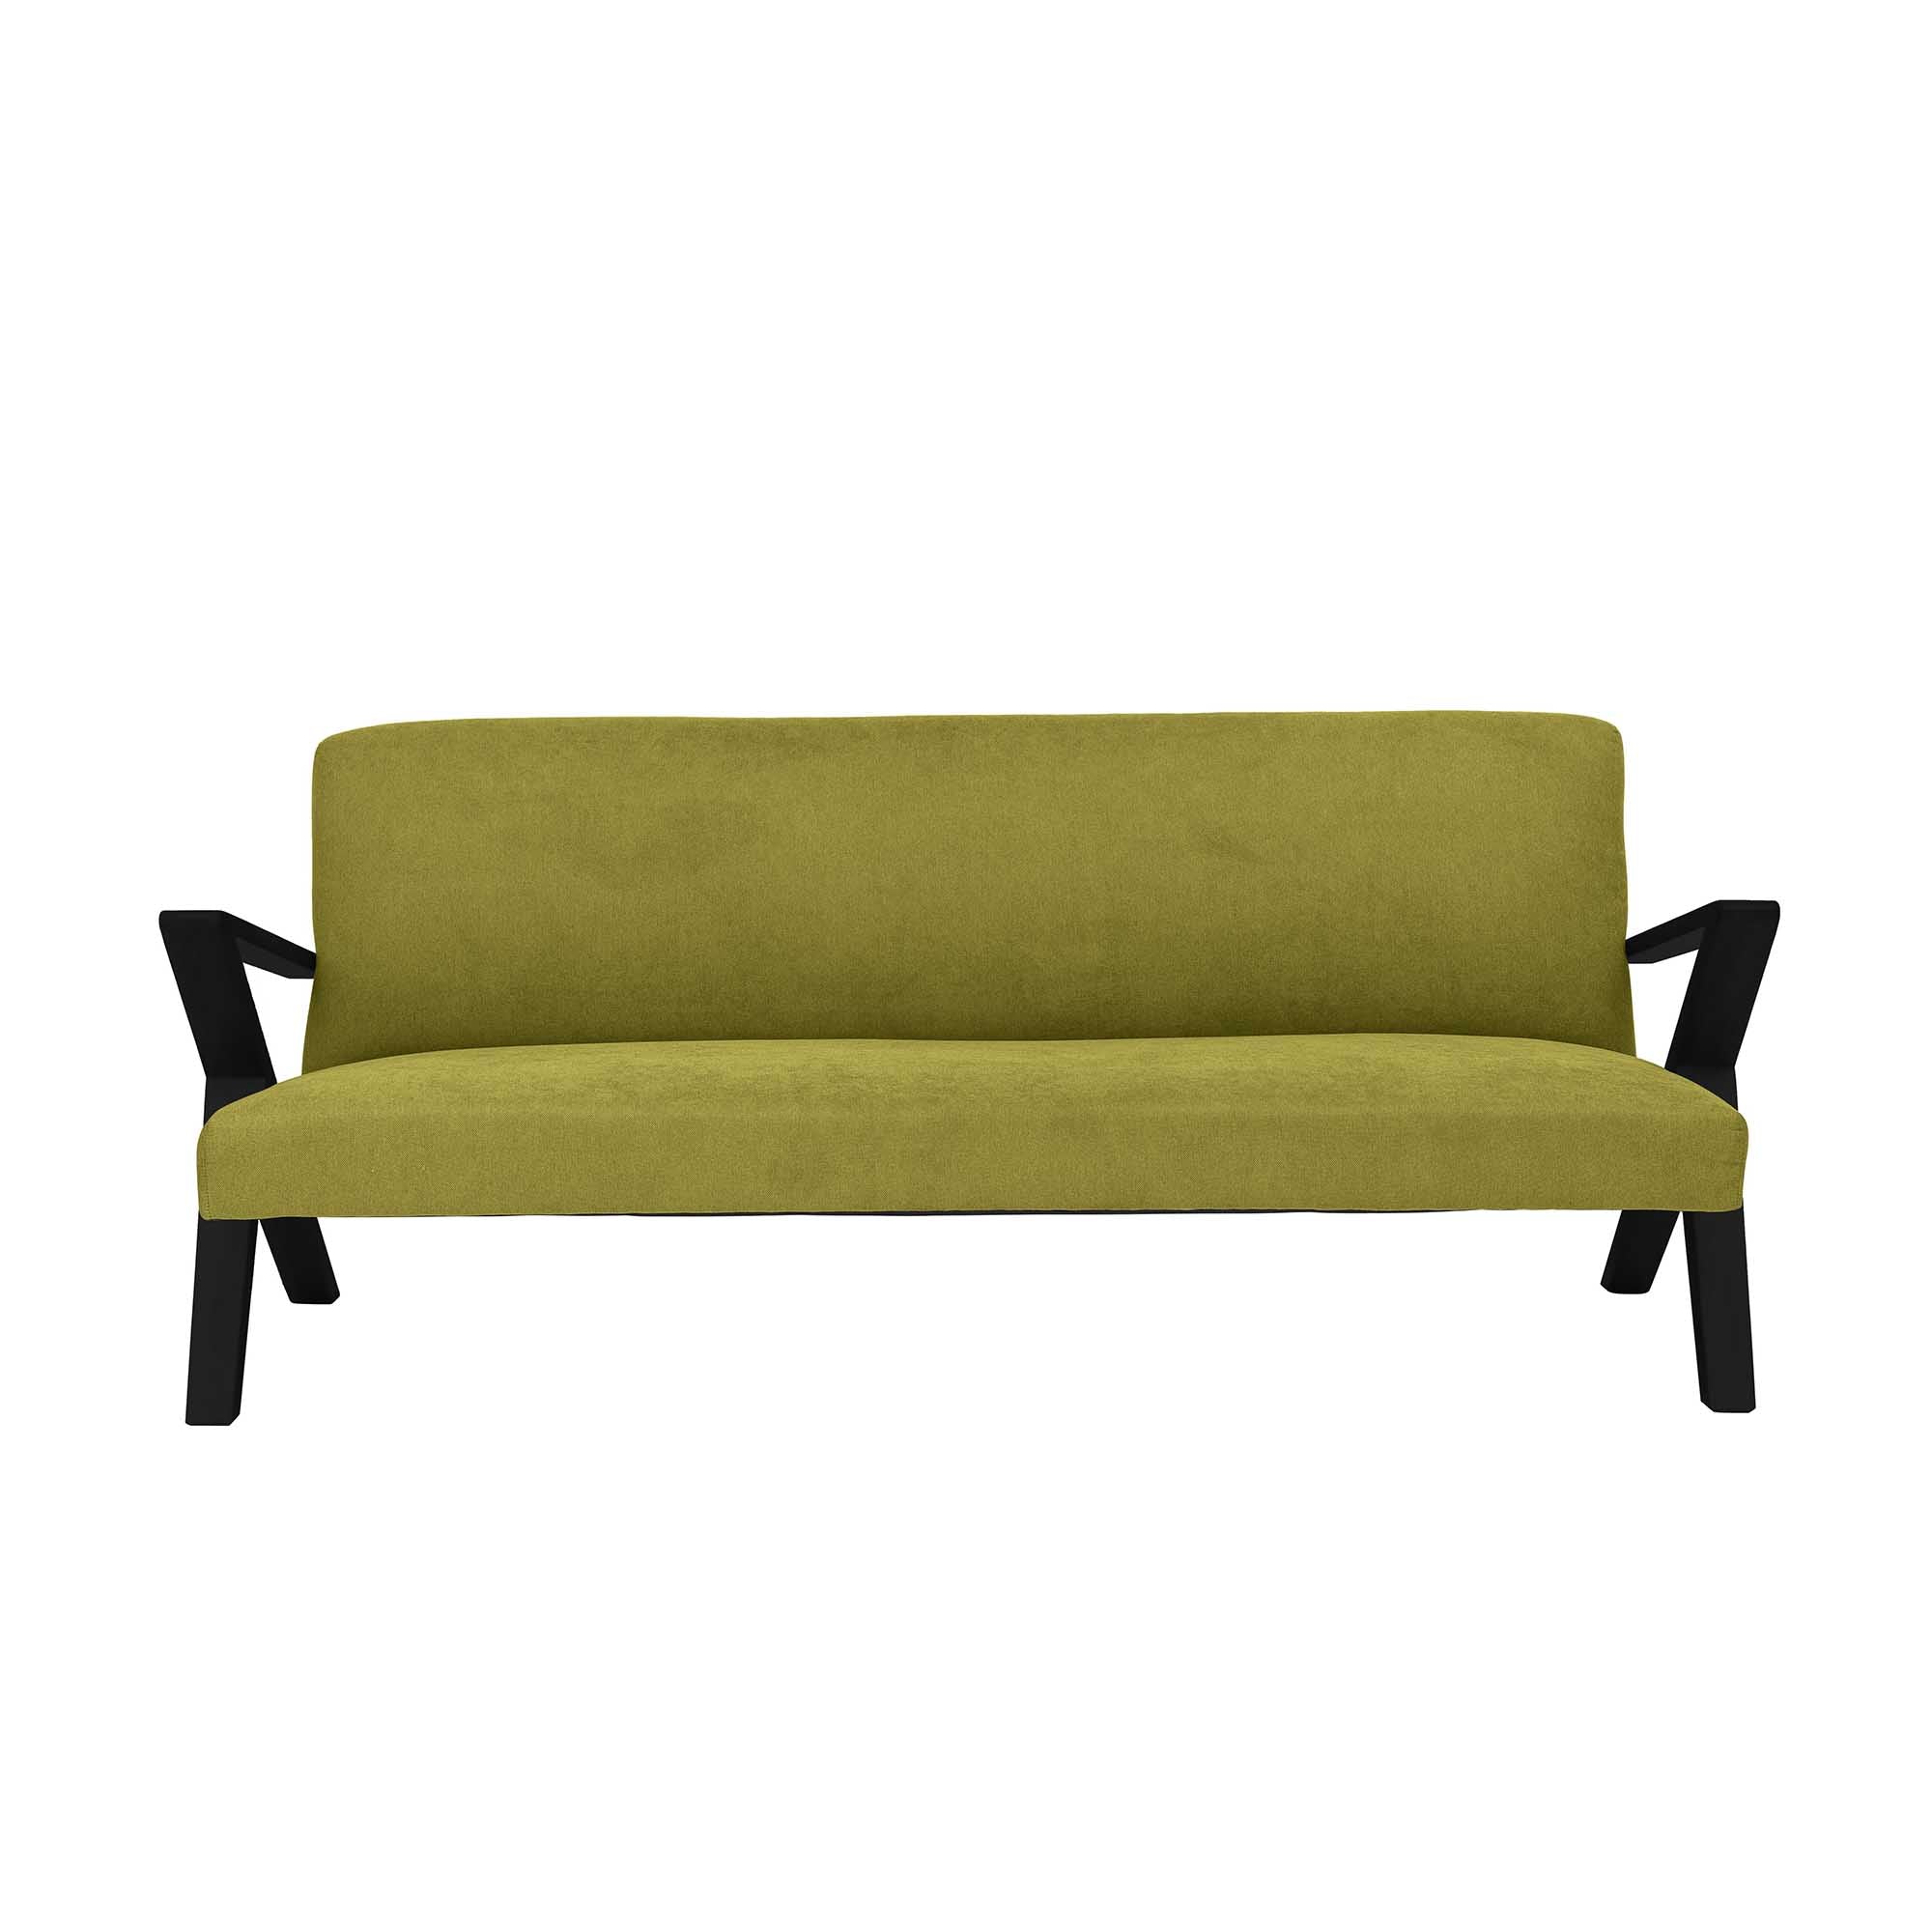  4-seater Sofa Beech Wood Frame, Black Lacquered green fabric, front view